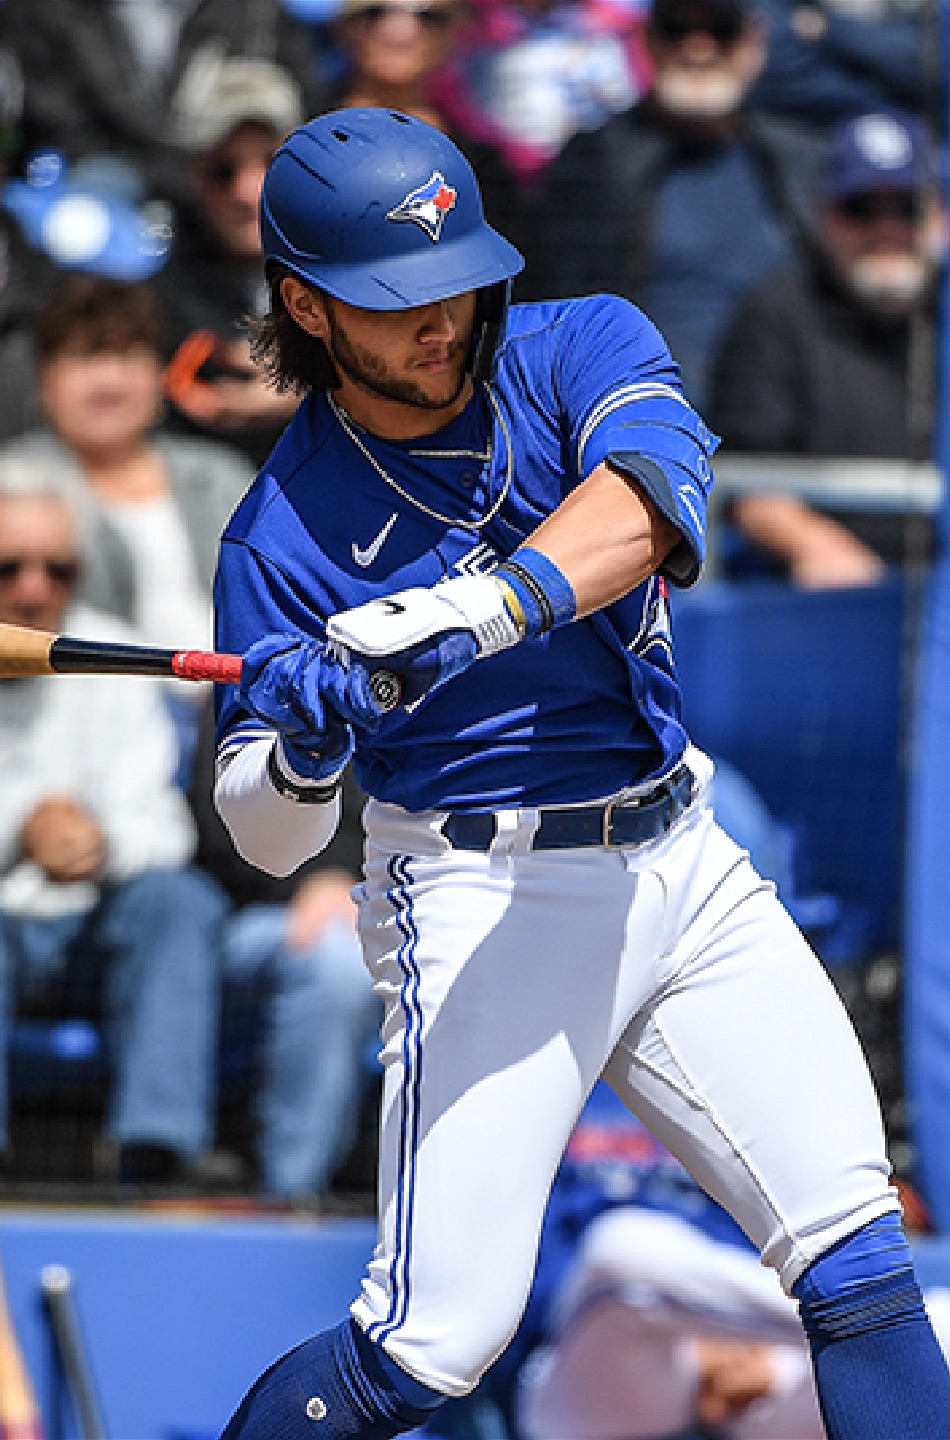 The Toronto Blue Jays are on the rise